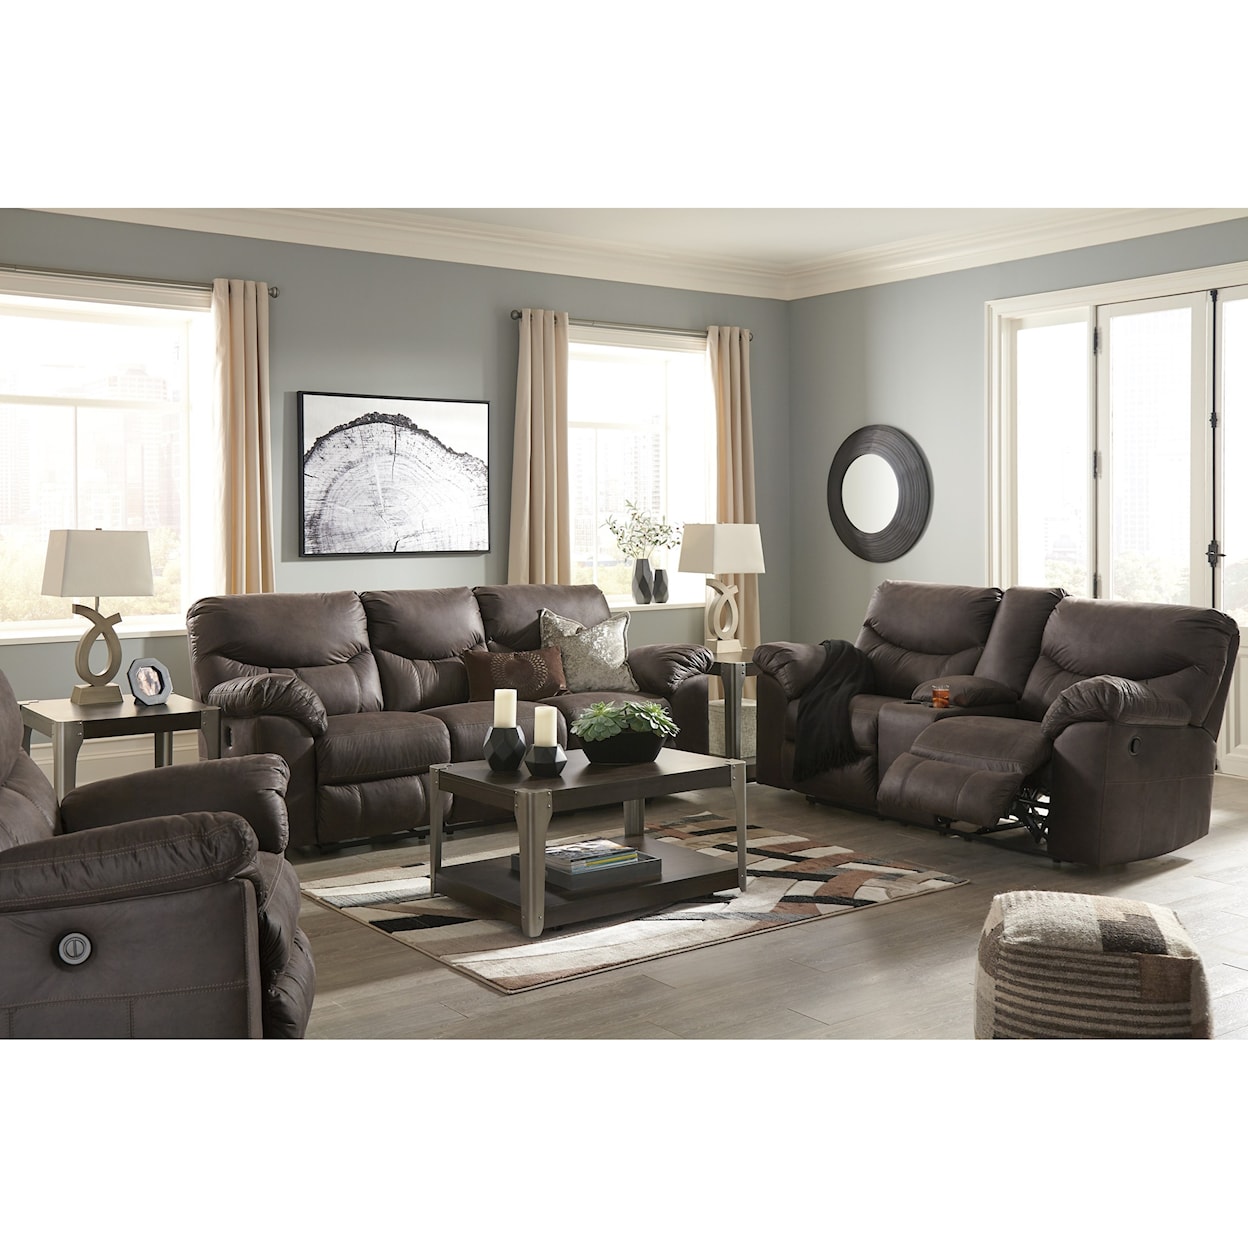 Signature Design by Ashley Furniture Boxberg Reclining Living Room Group